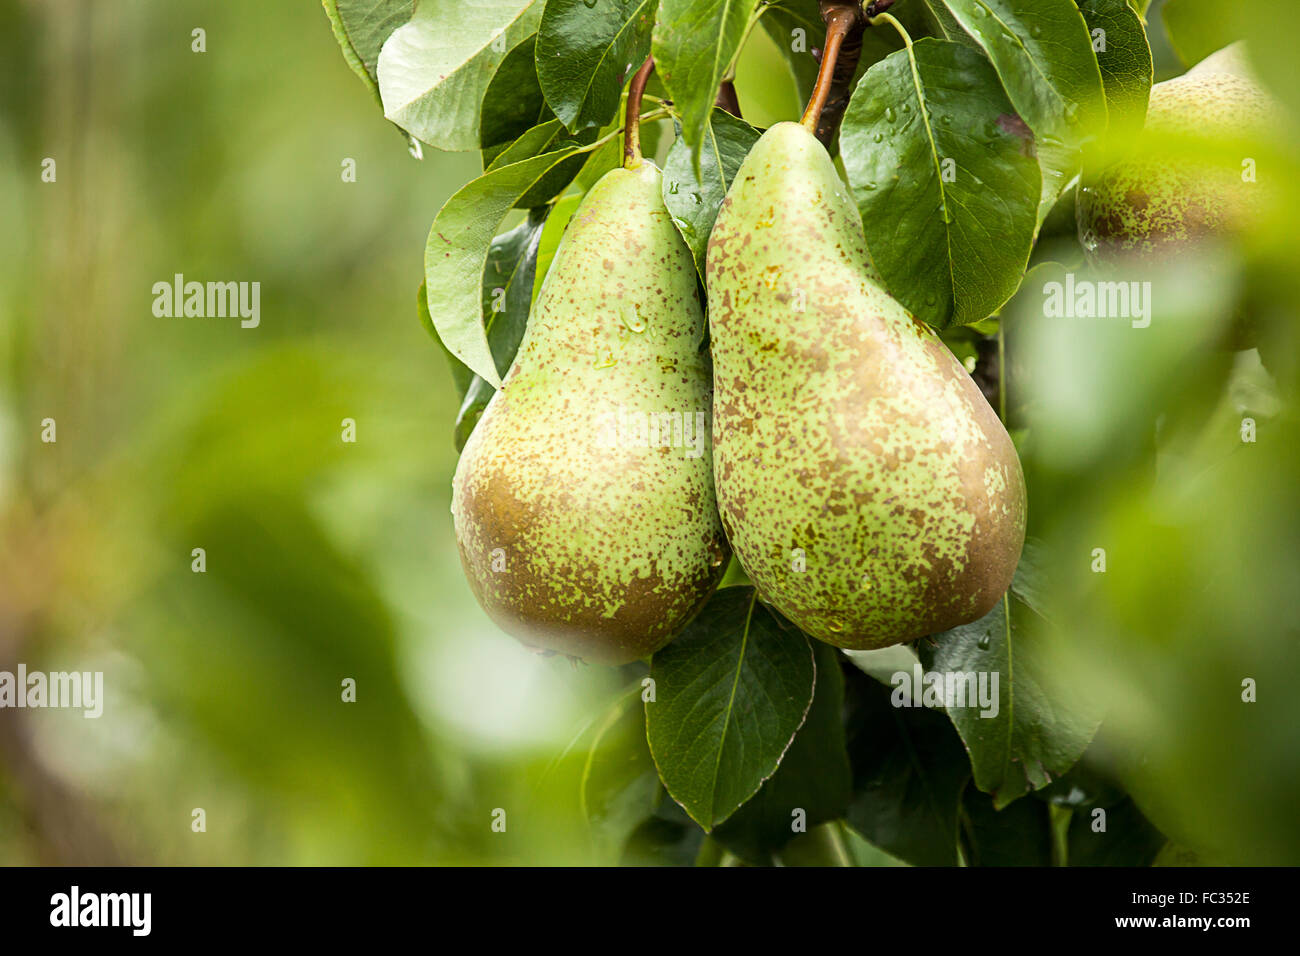 Pear Conference (Pyrus communis) Stock Photo